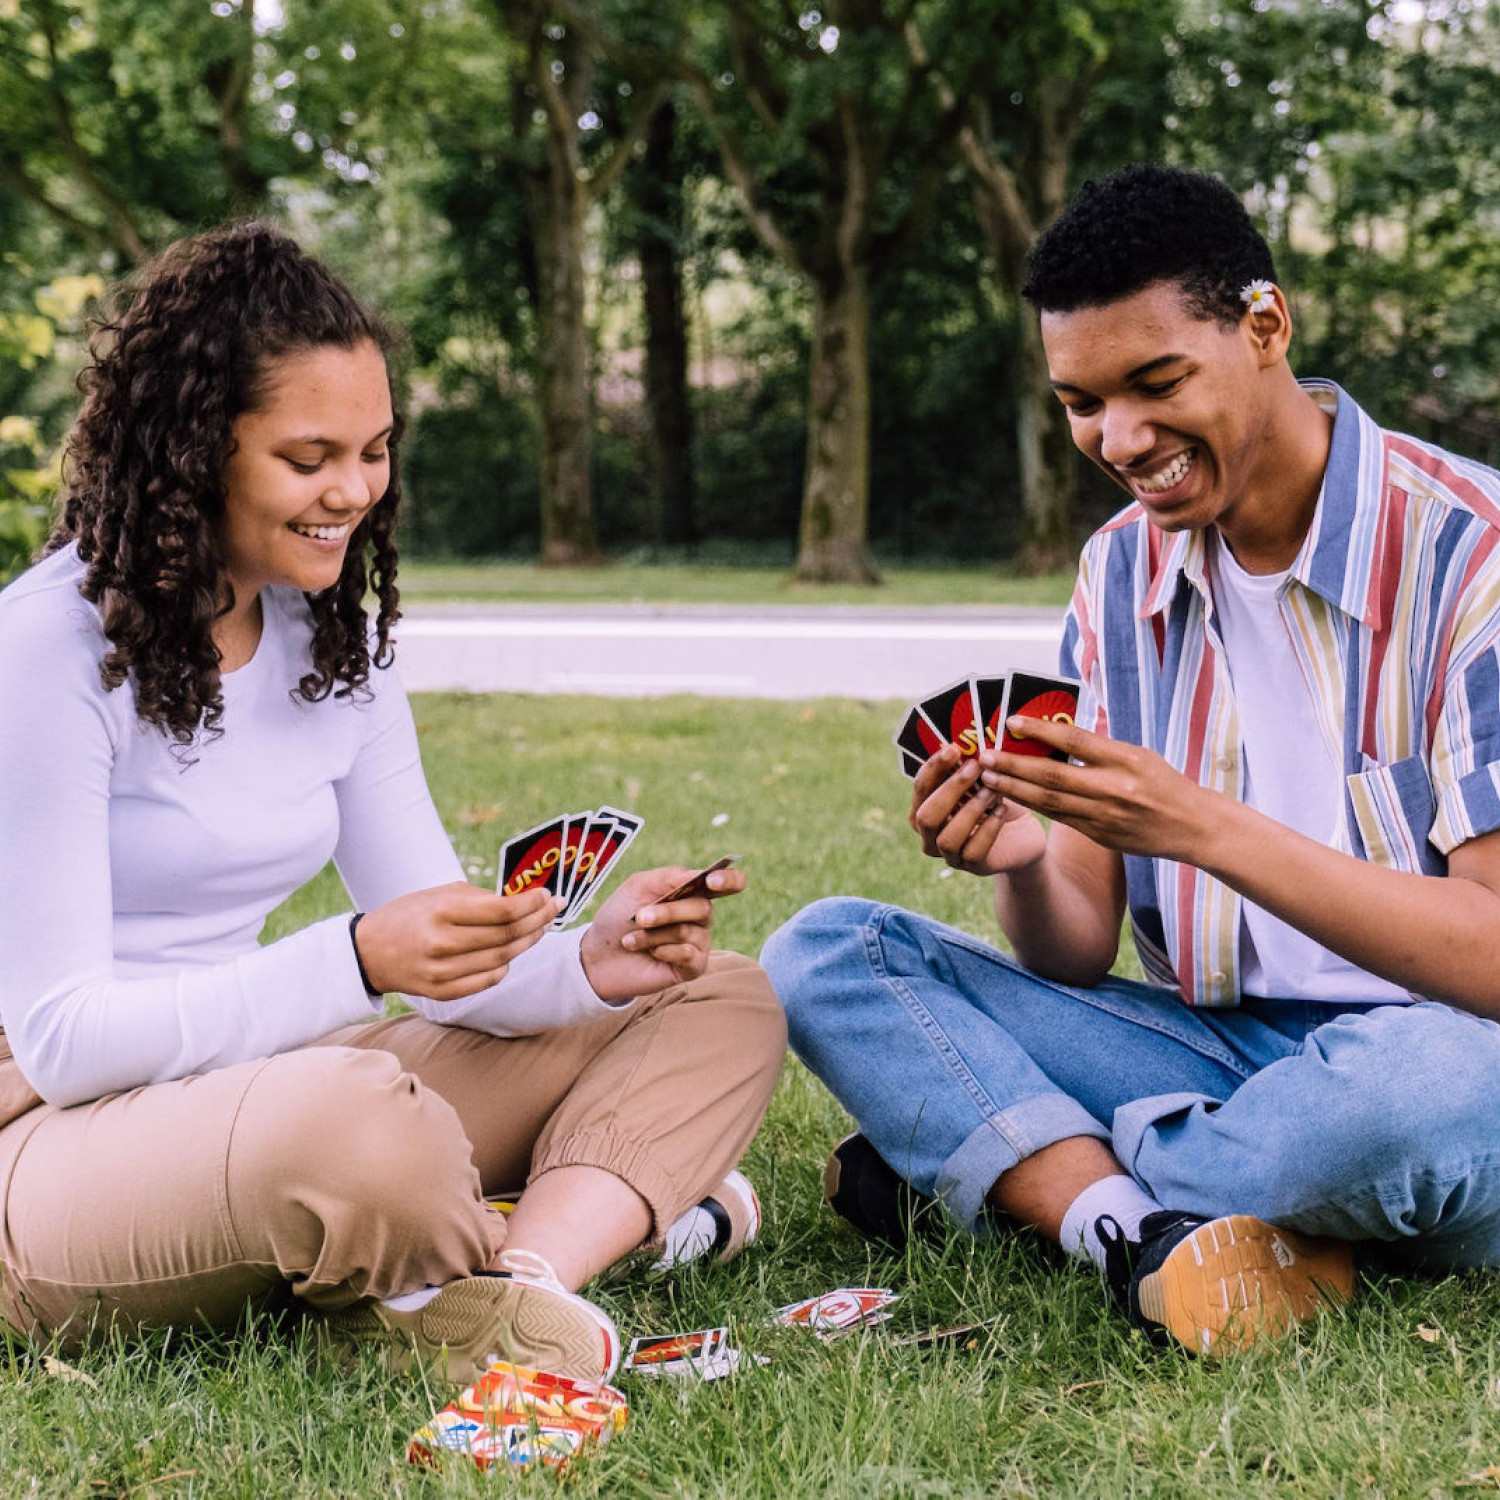 Two friends play uno together cross-legged in the park.